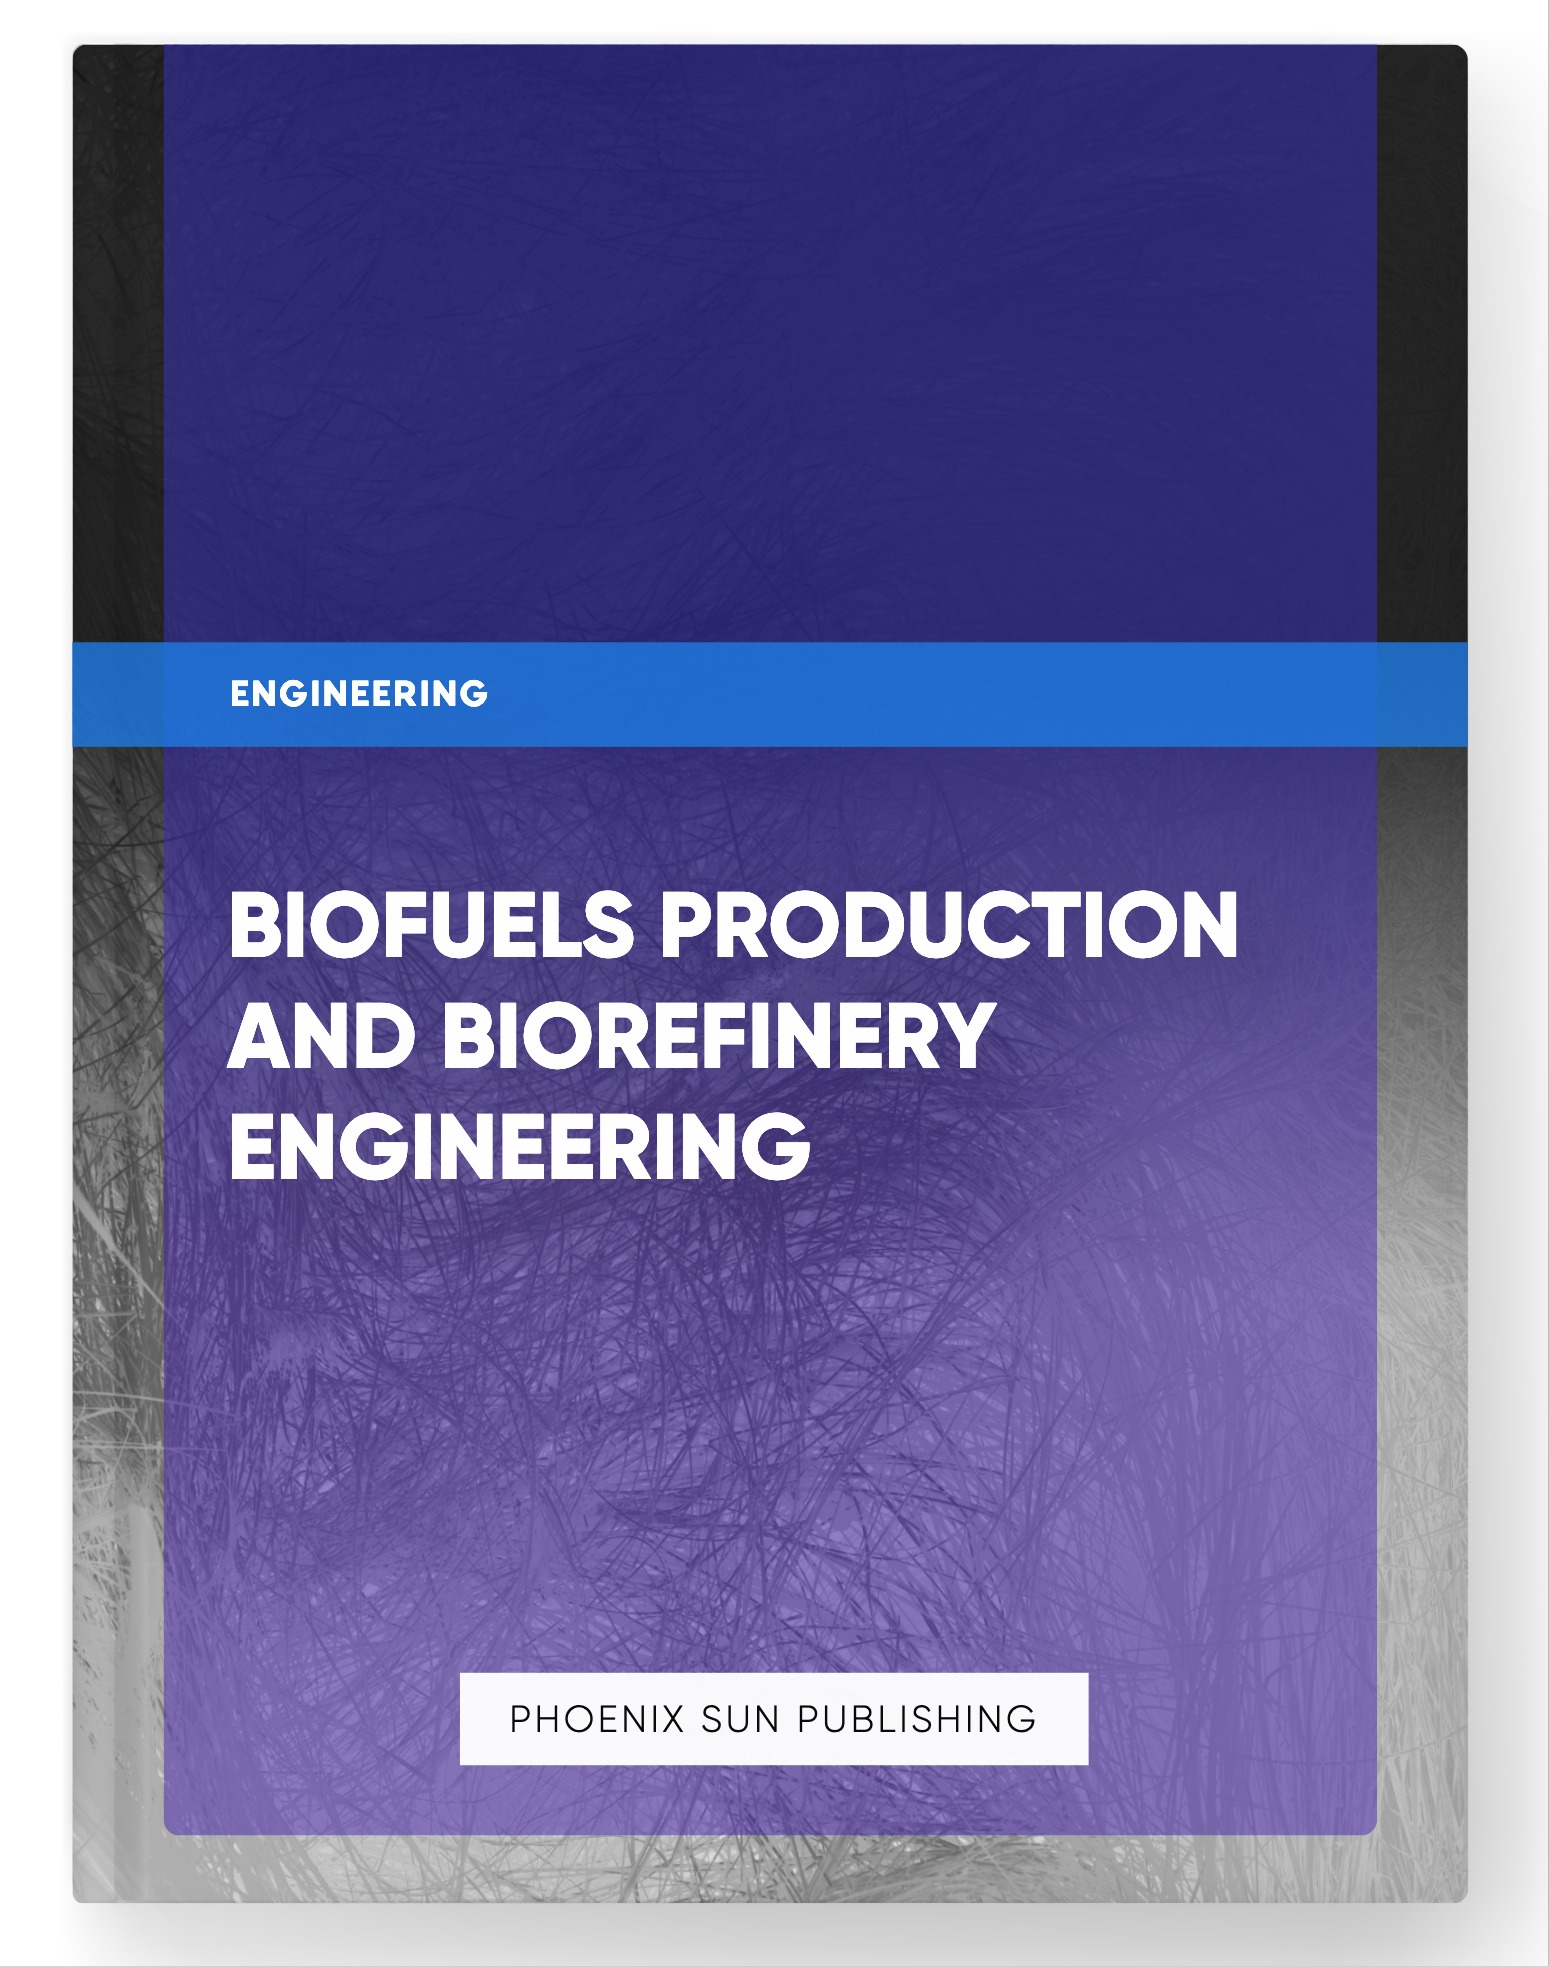 Biofuels Production and Biorefinery Engineering